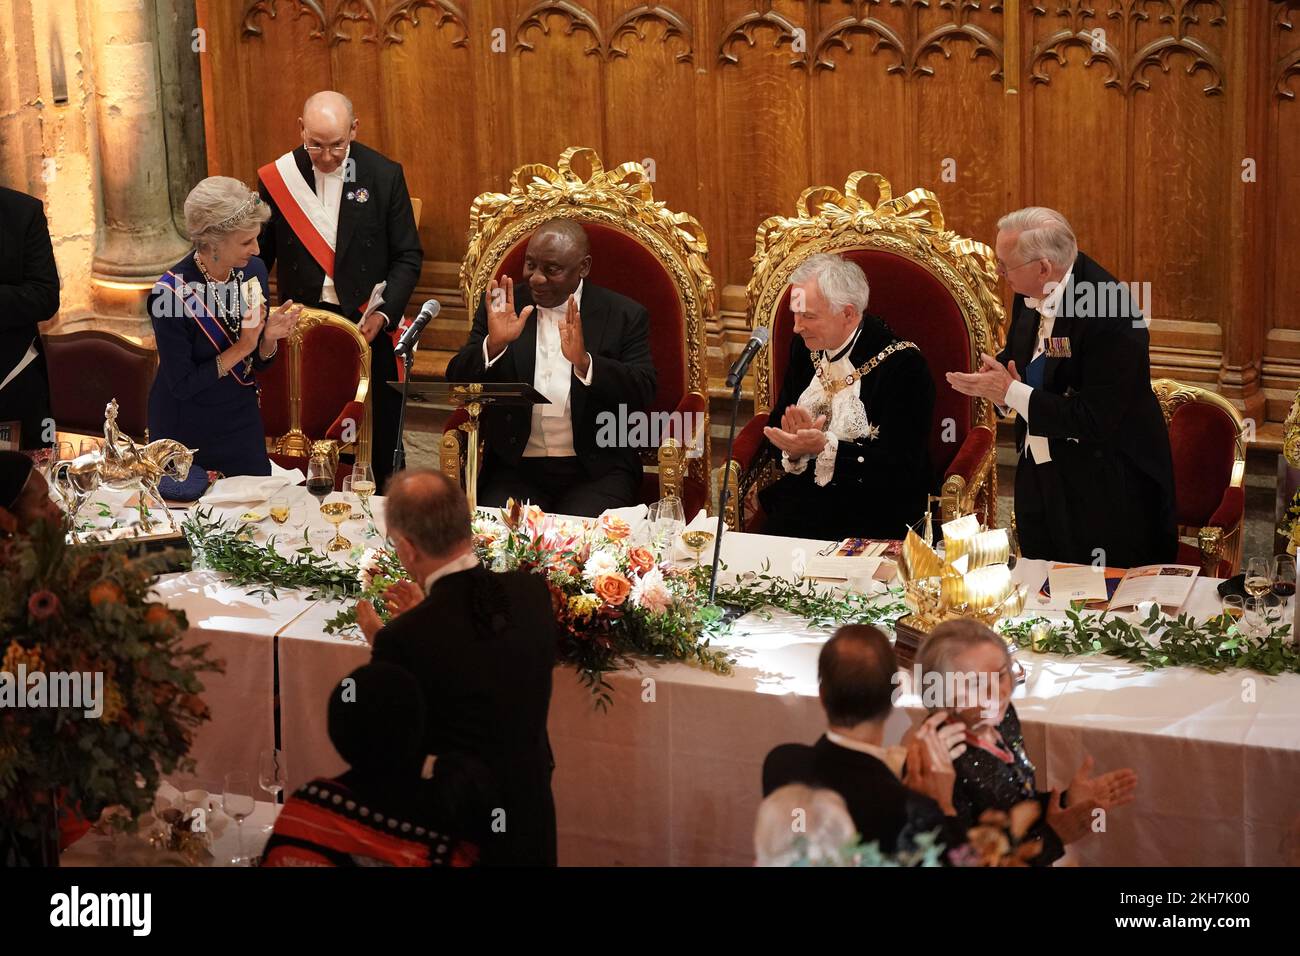 (left to right) The Duchess of Gloucester, President Cyril Ramaphosa of South Africa, the Lord Mayor of London, Nicholas Lyons and the Duke of Gloucester during a banquet at the Guildhall in London, given by the Lord Mayor and City of London Corporation, for Mr Ramaphosa's state visit to the UK. Picture date: Wednesday November 23, 2022. Stock Photo